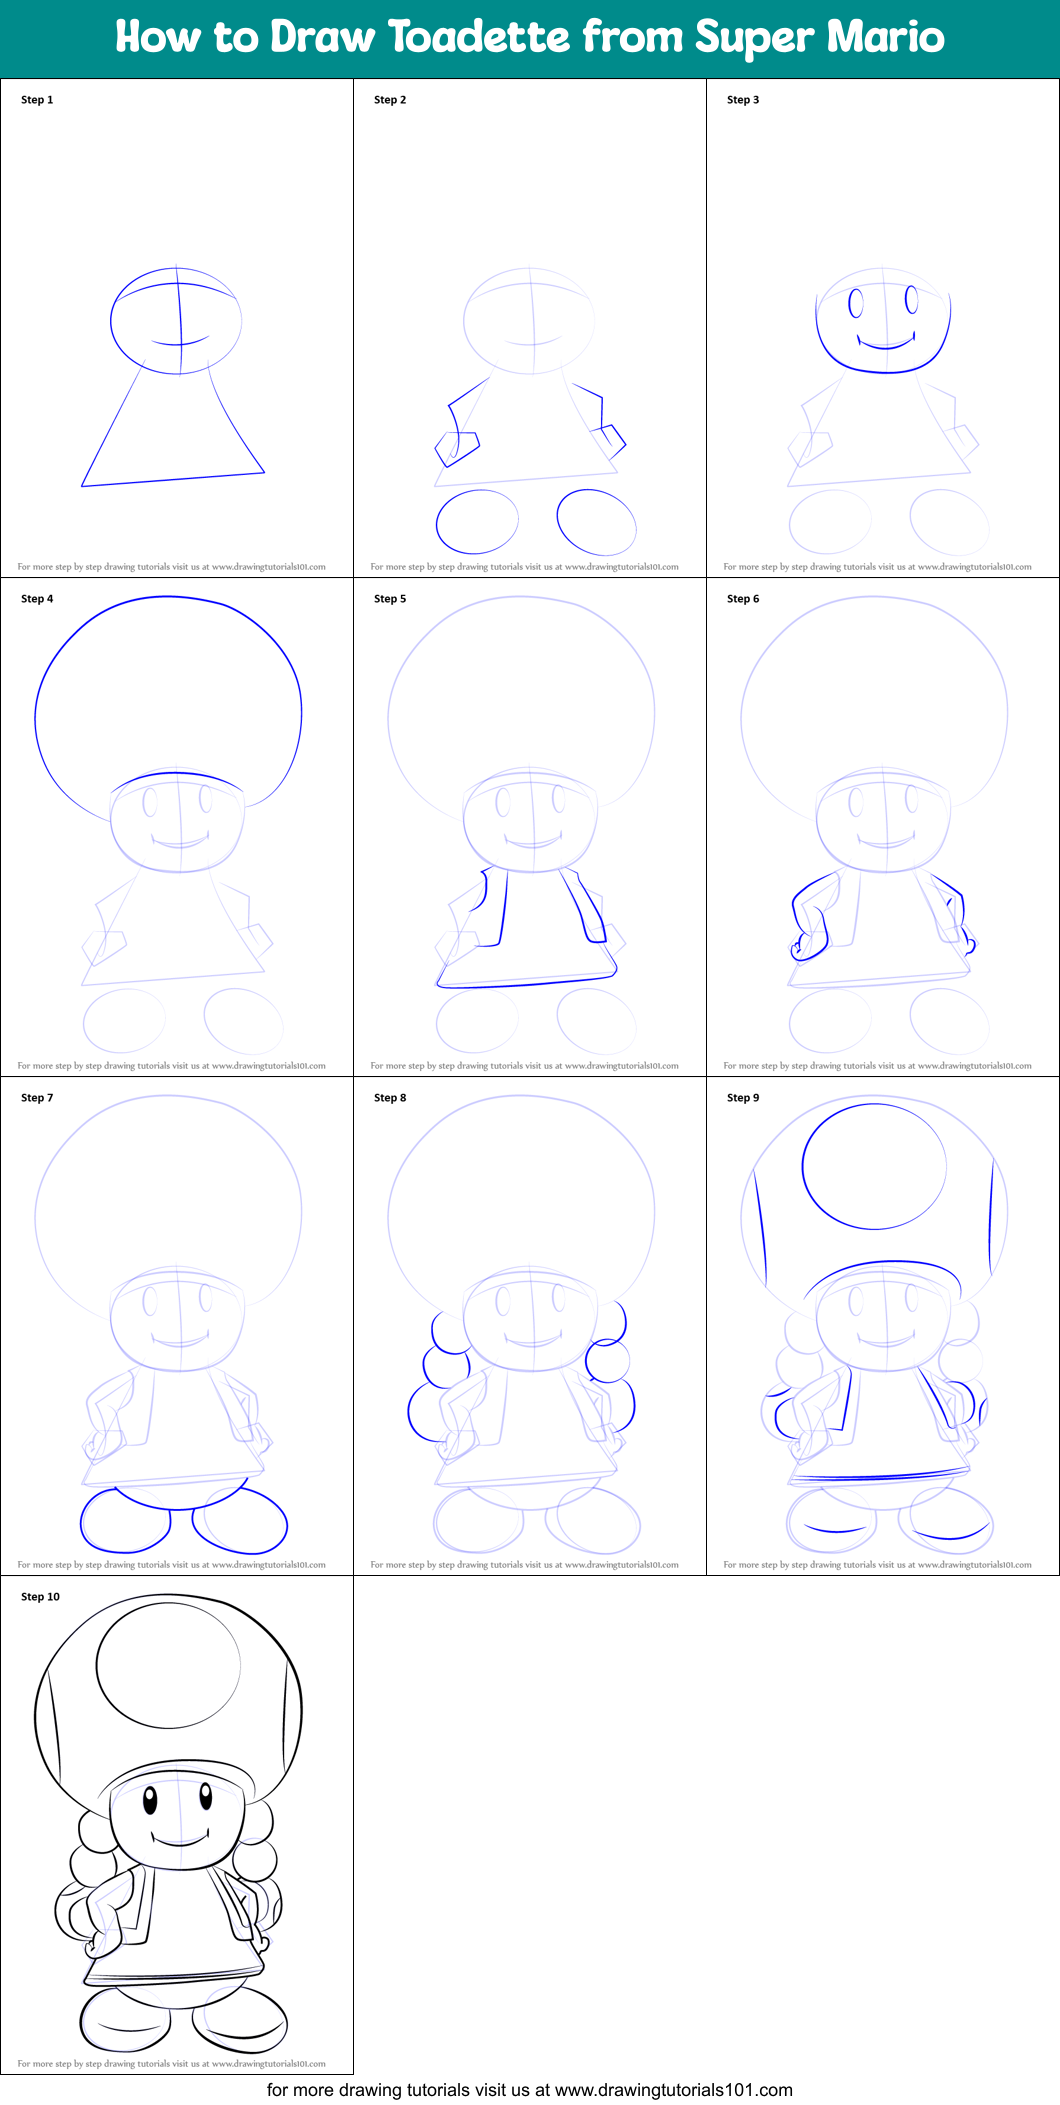 How to Draw Toadette from Super Mario printable step by step drawing